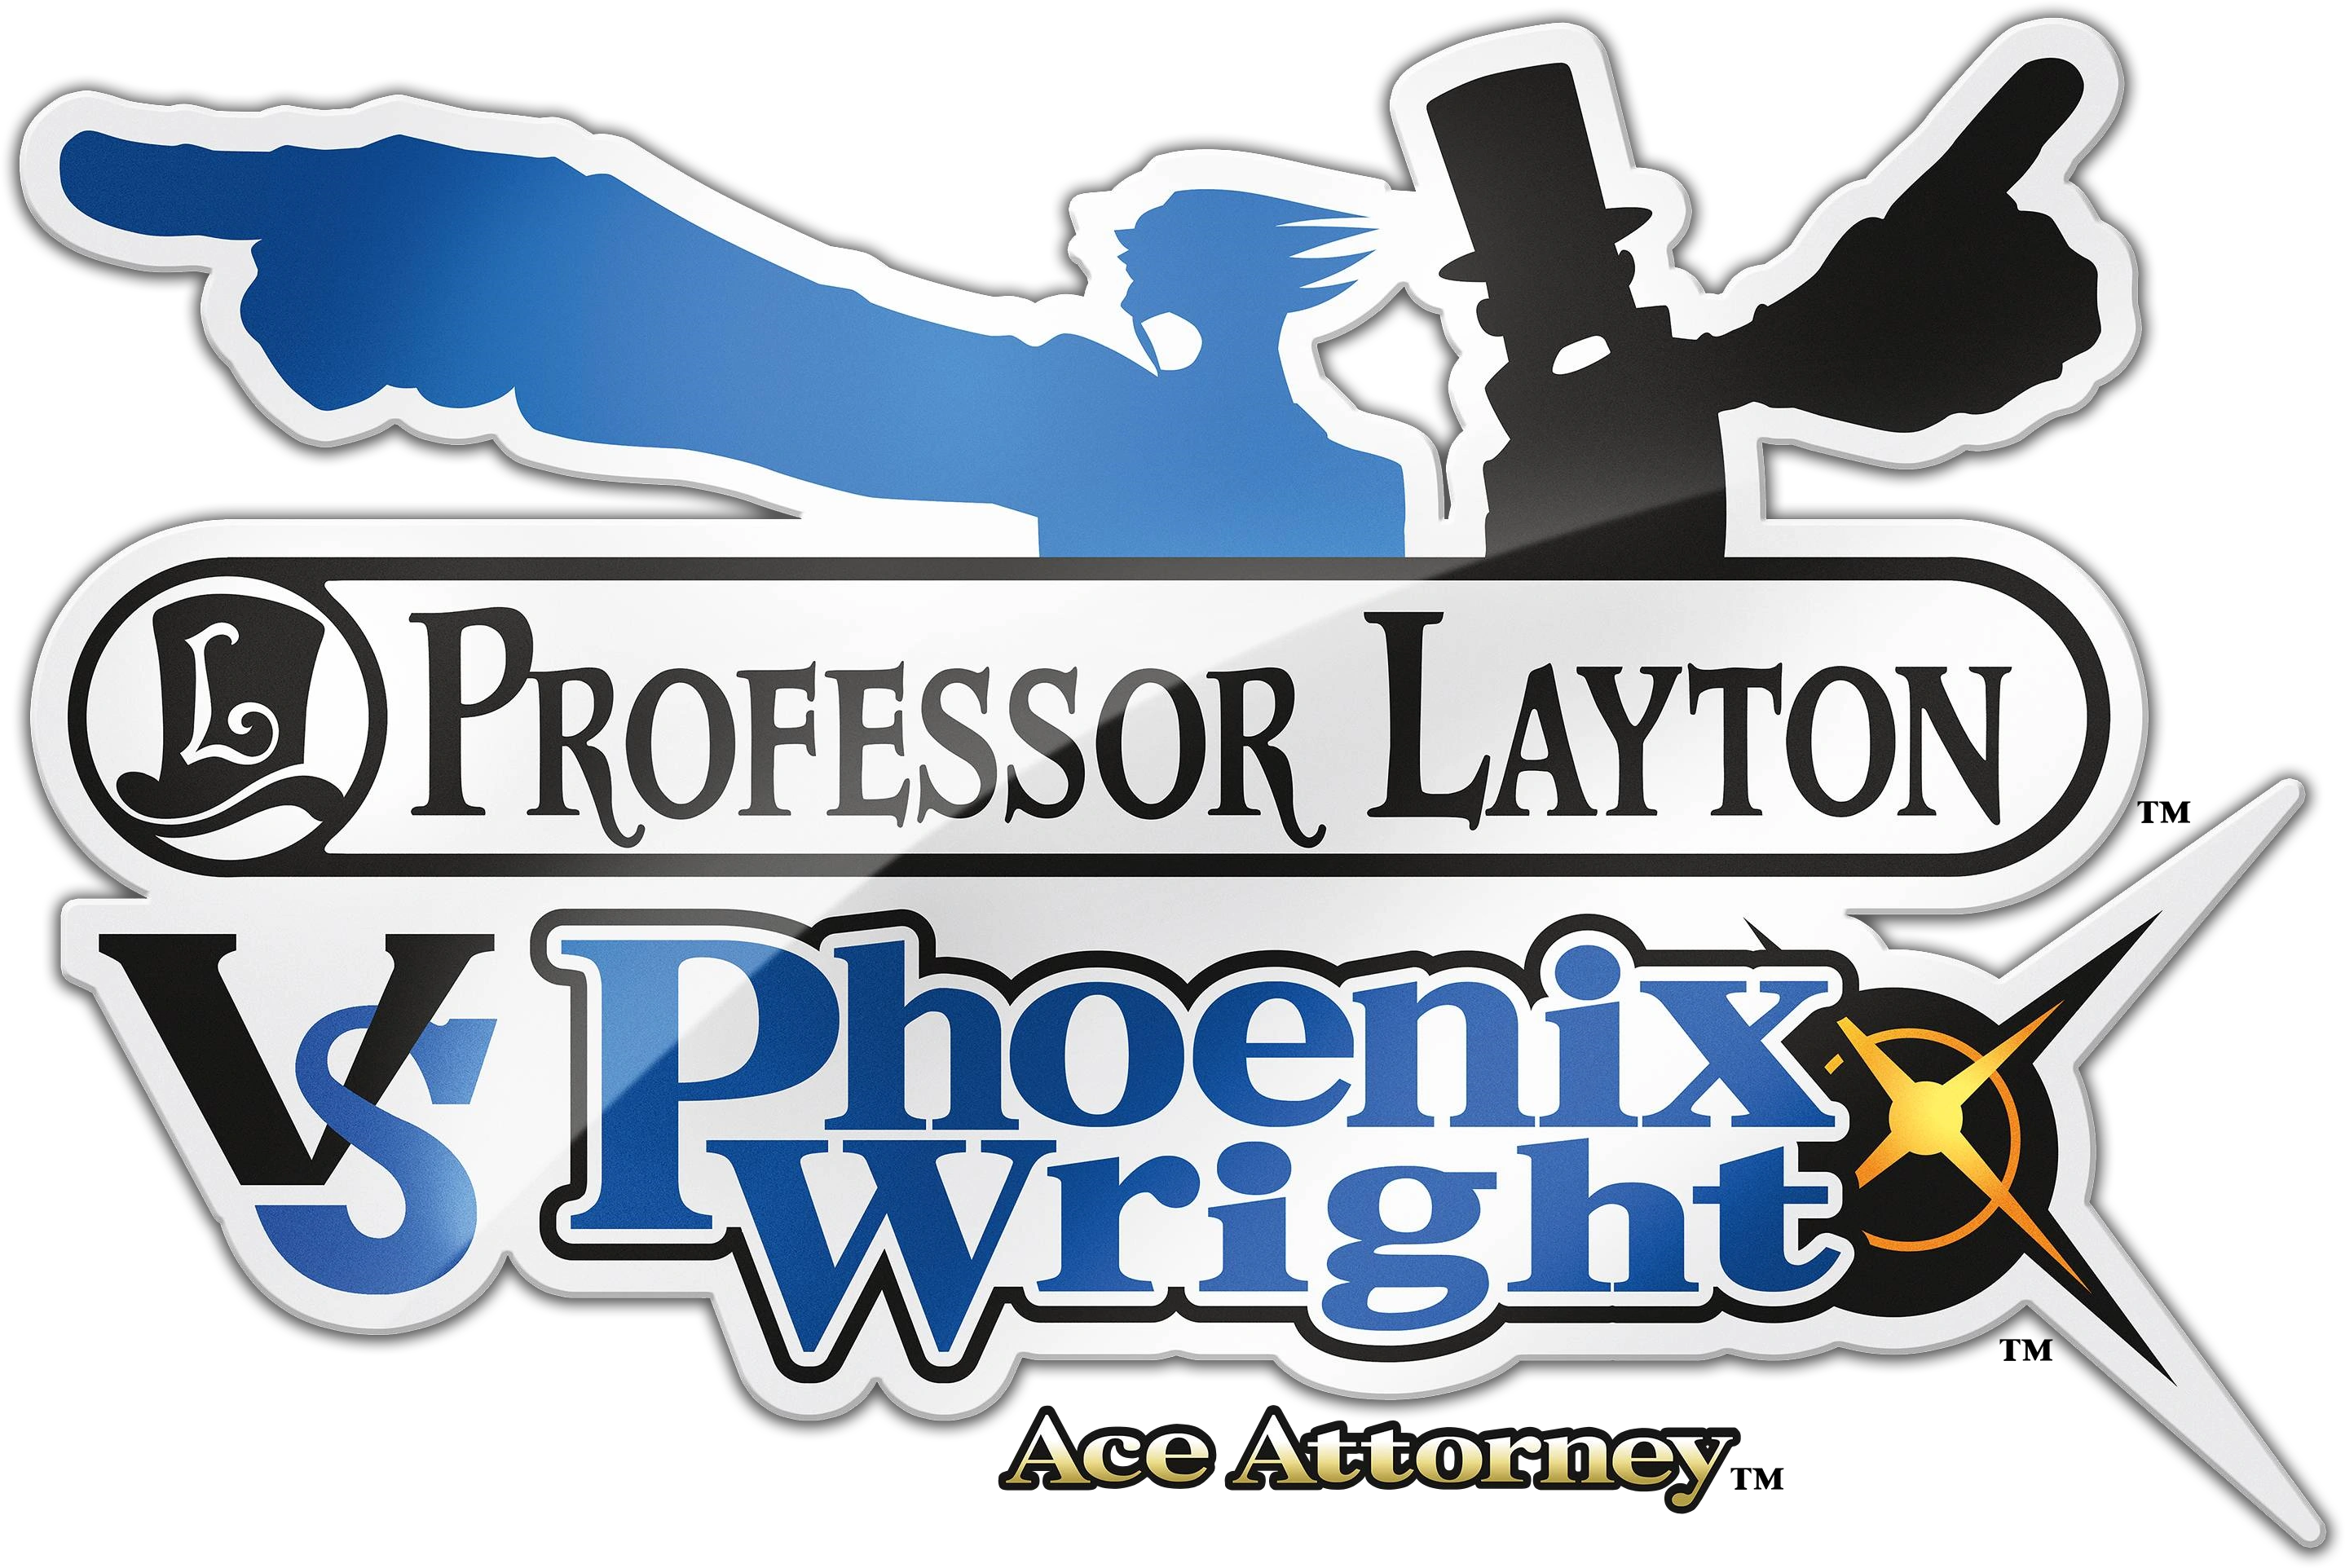 The Great / Ace Attorney Crossover] The Return of the Blossoming